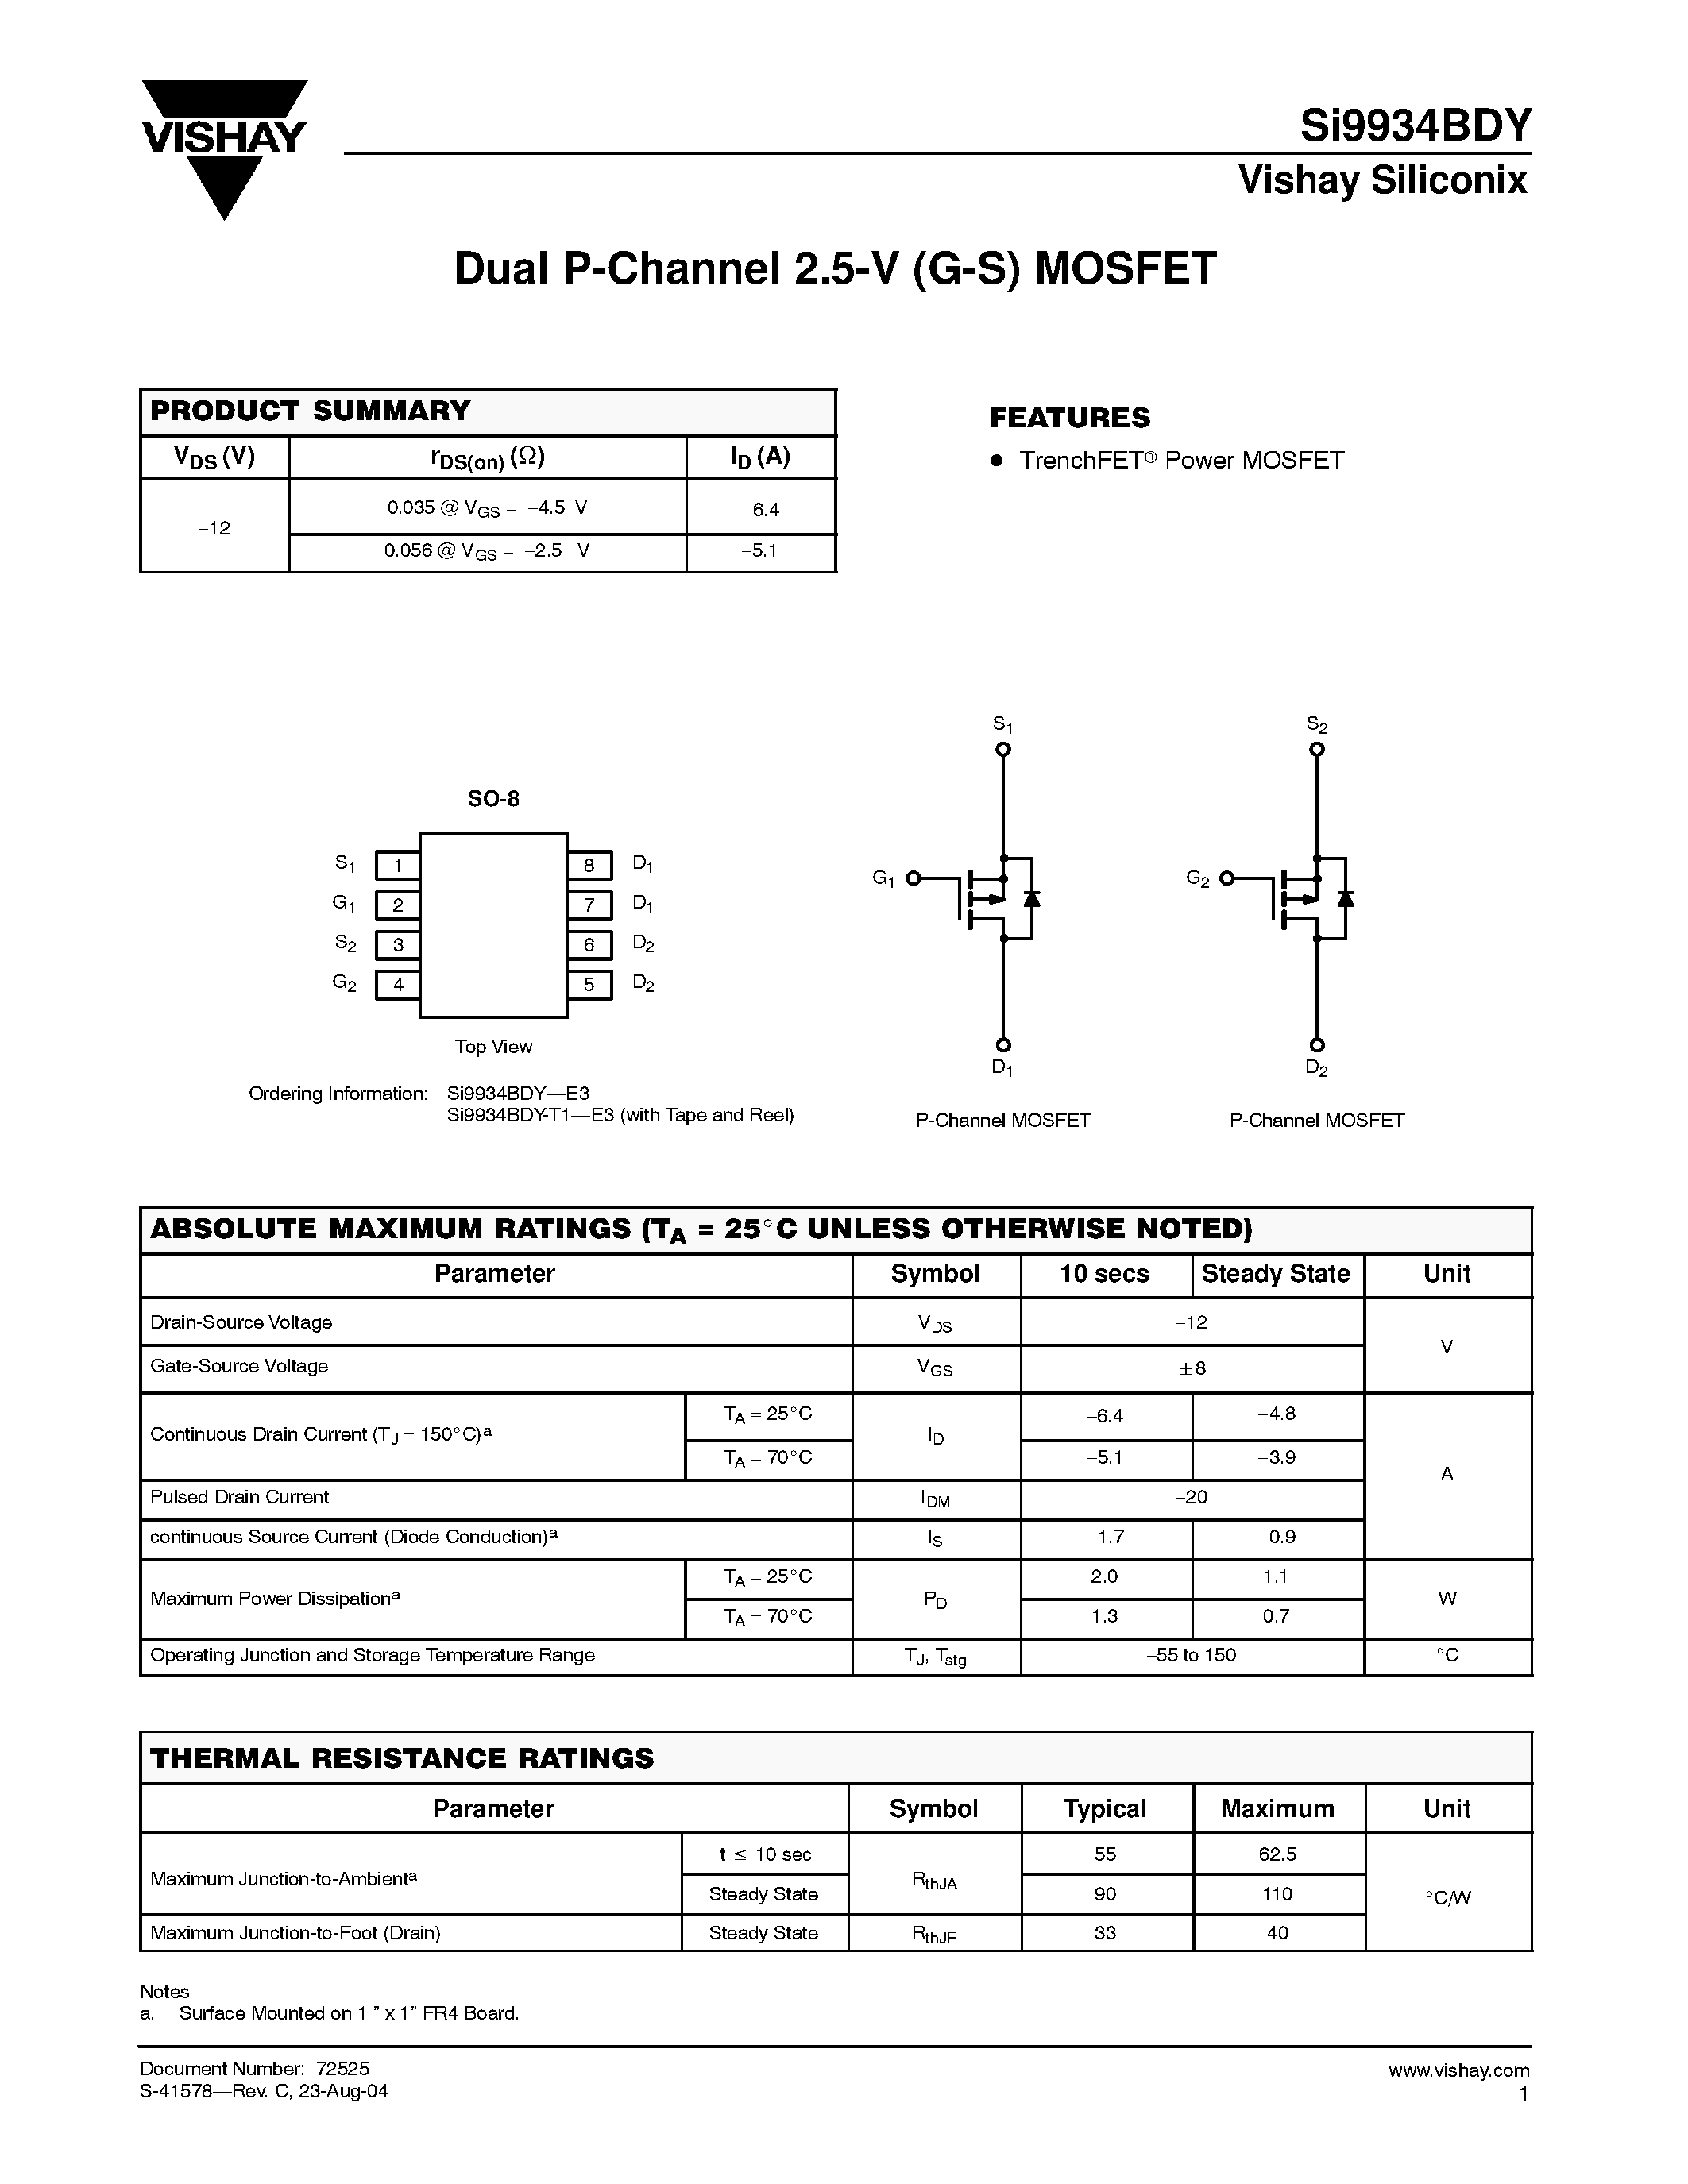 Даташит SI9934BDY-T1-E3 - Dual P-Channel 2.5-V (G-S) MOSFET страница 1